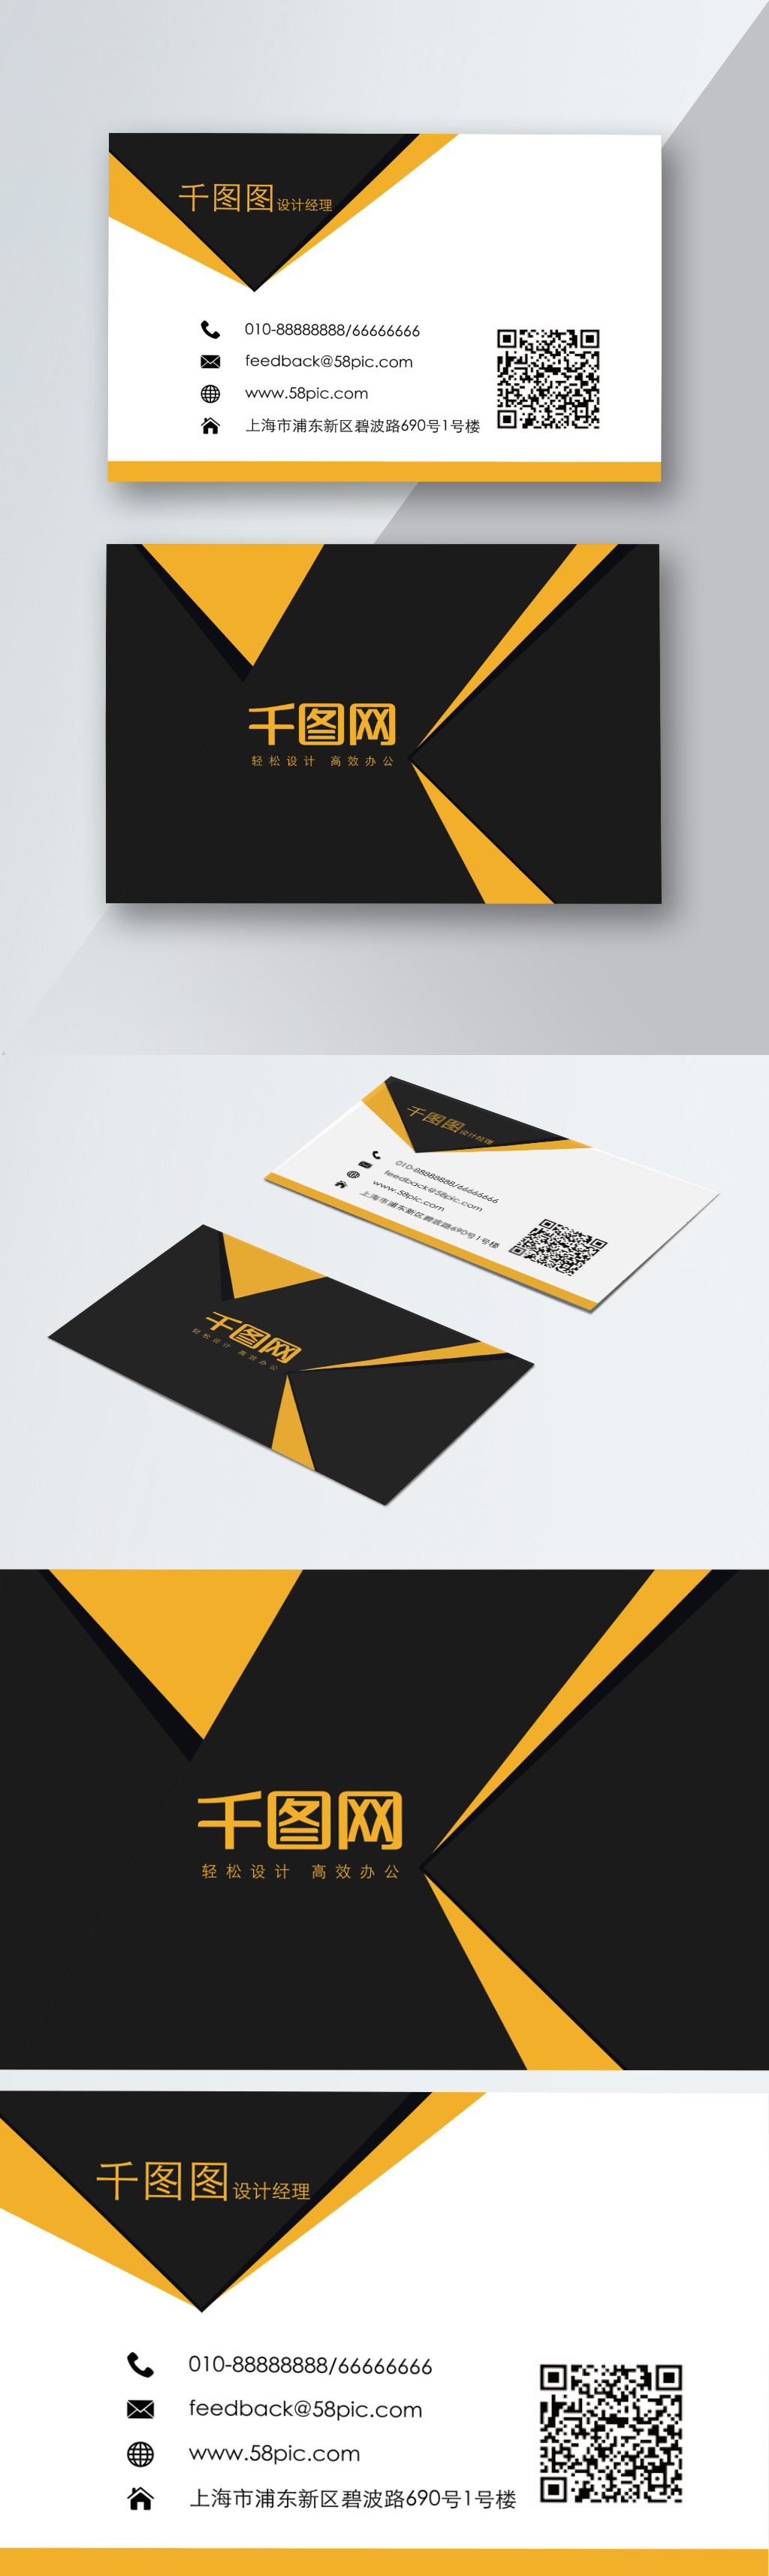 Yellow And Black Business Card Template Image Picture Free Download 450007589 Lovepik Com